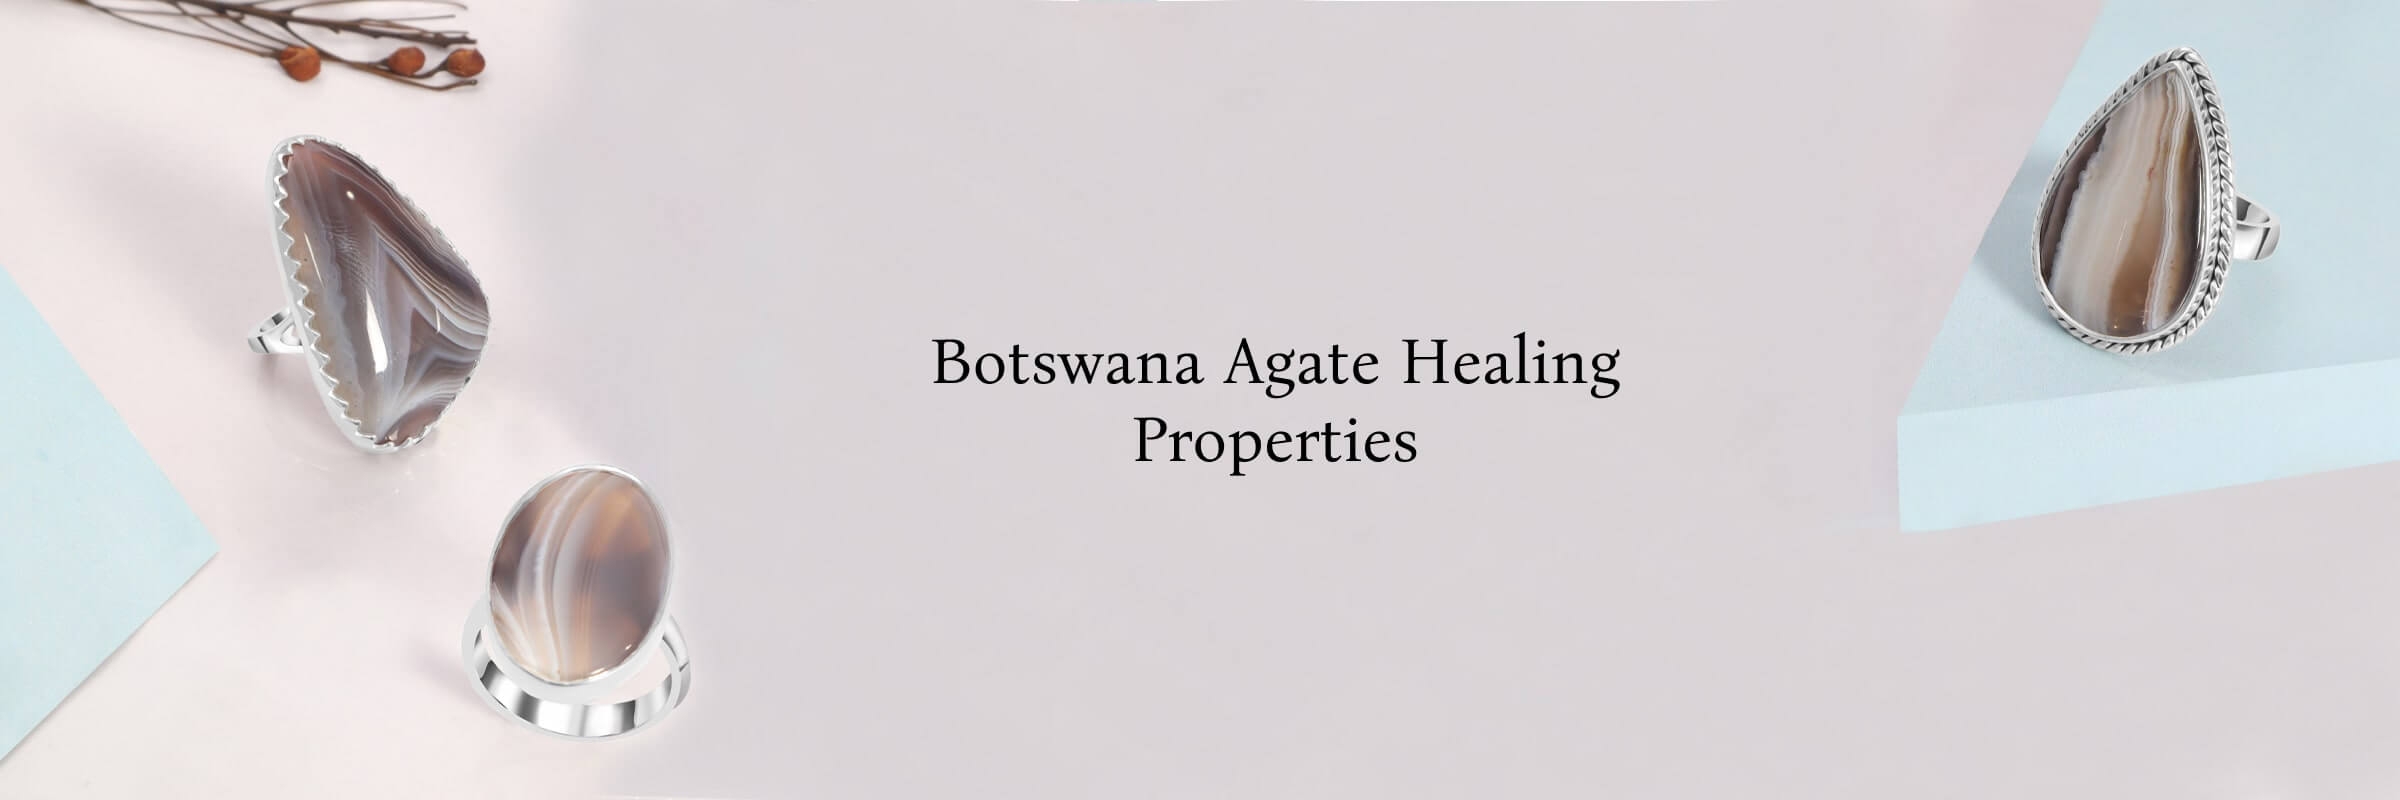 Botswana Agate: Meaning and Properties - The Complete Guide